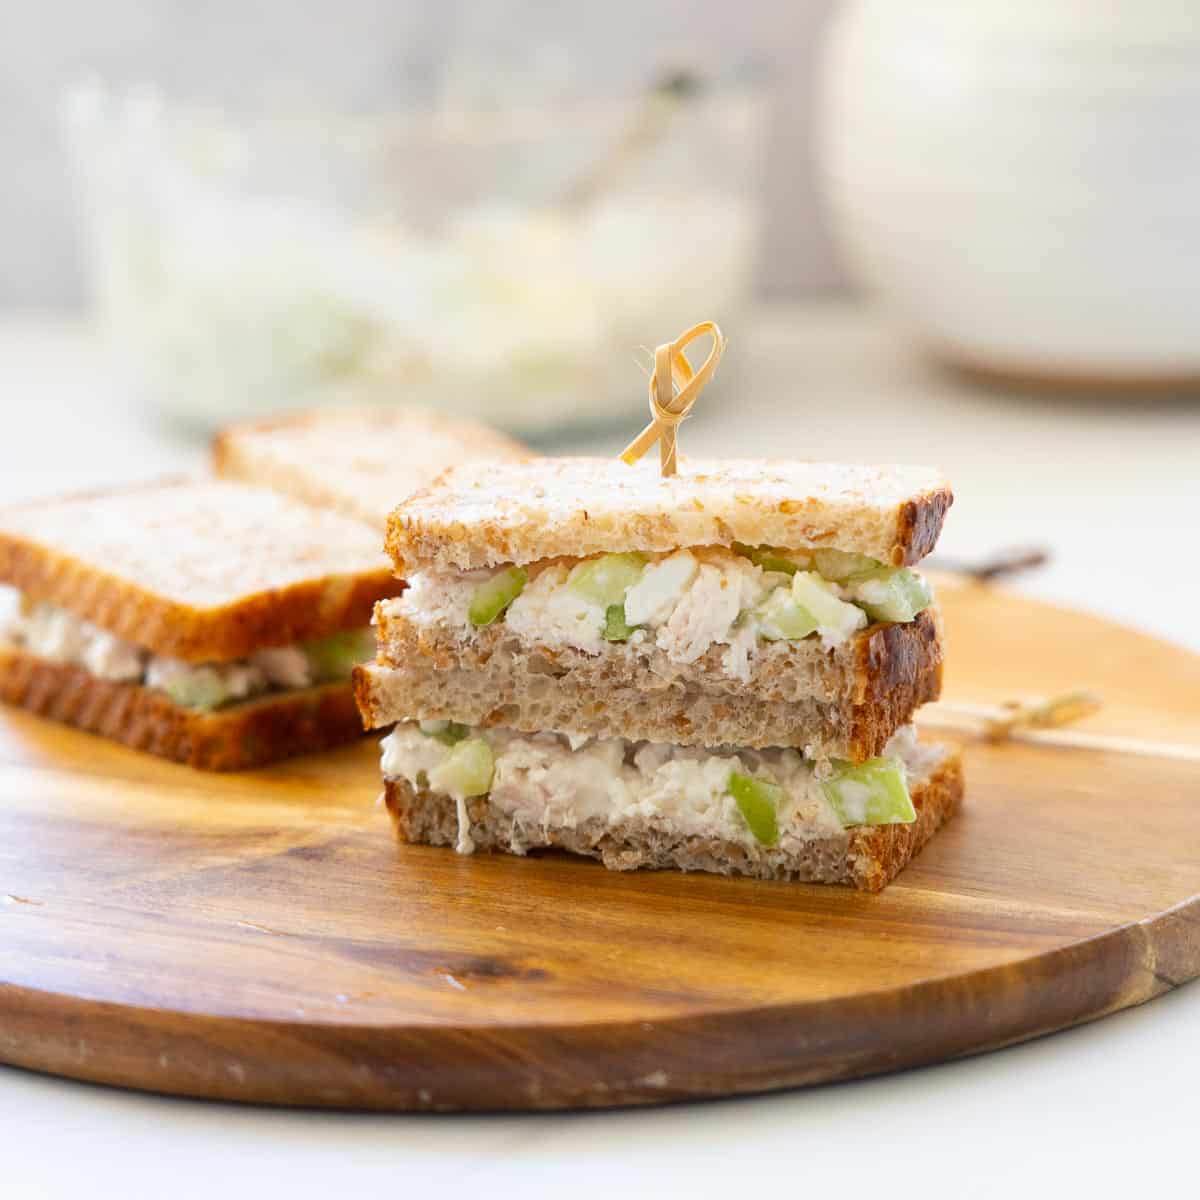 Shredded chicken sandwiches stacked on a wooden board and held together with a bamboo toothpick.